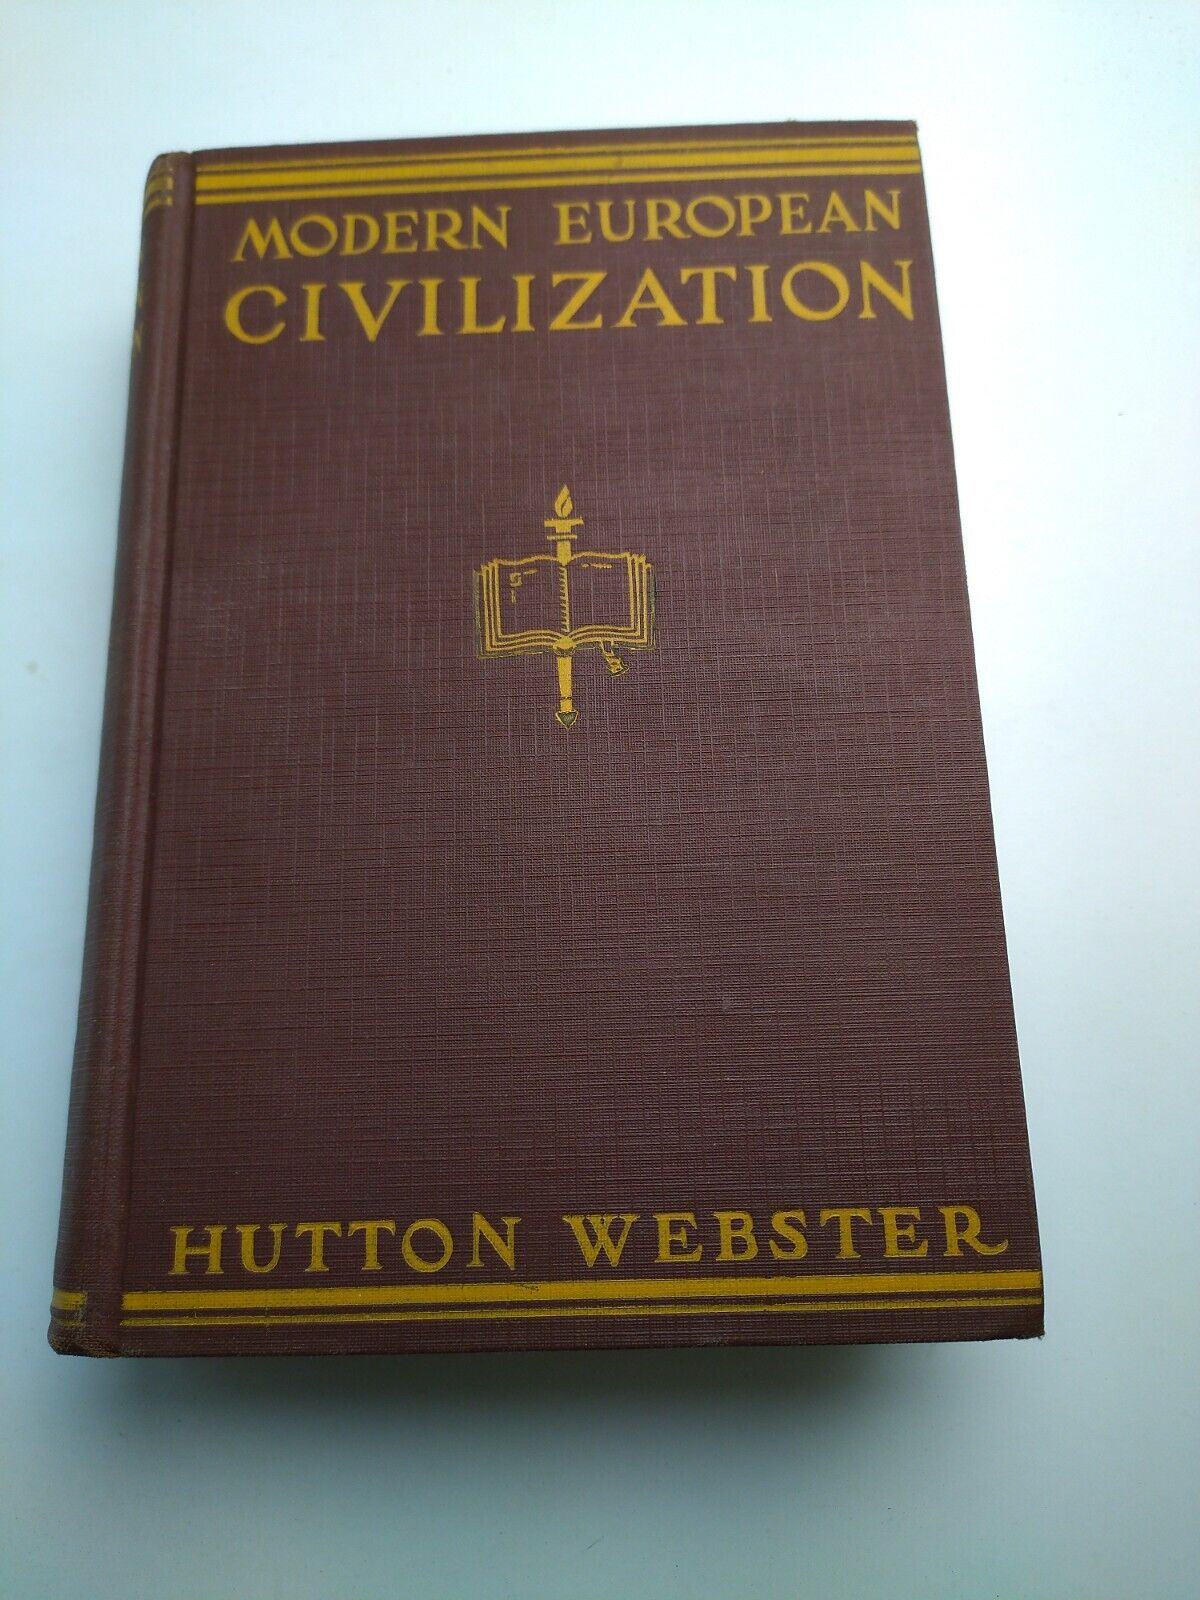 Early European Civilization Hutton Webster 1933 1st edition Very Good Hardcover